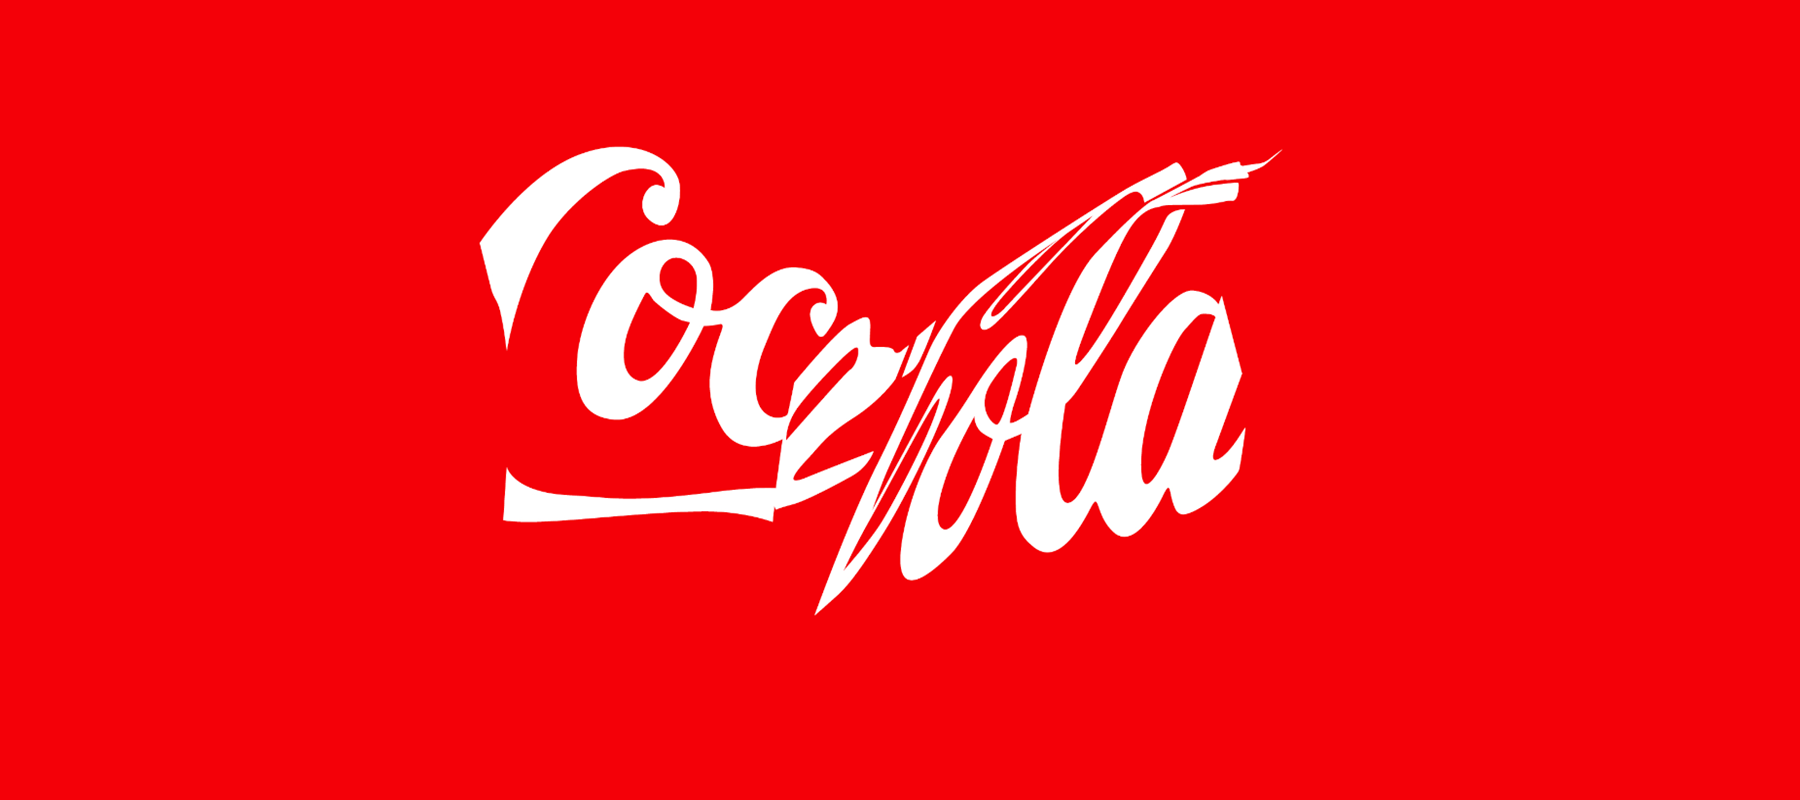 Coca-Cola, Siemens campaigns among winners in the Cannes Lions